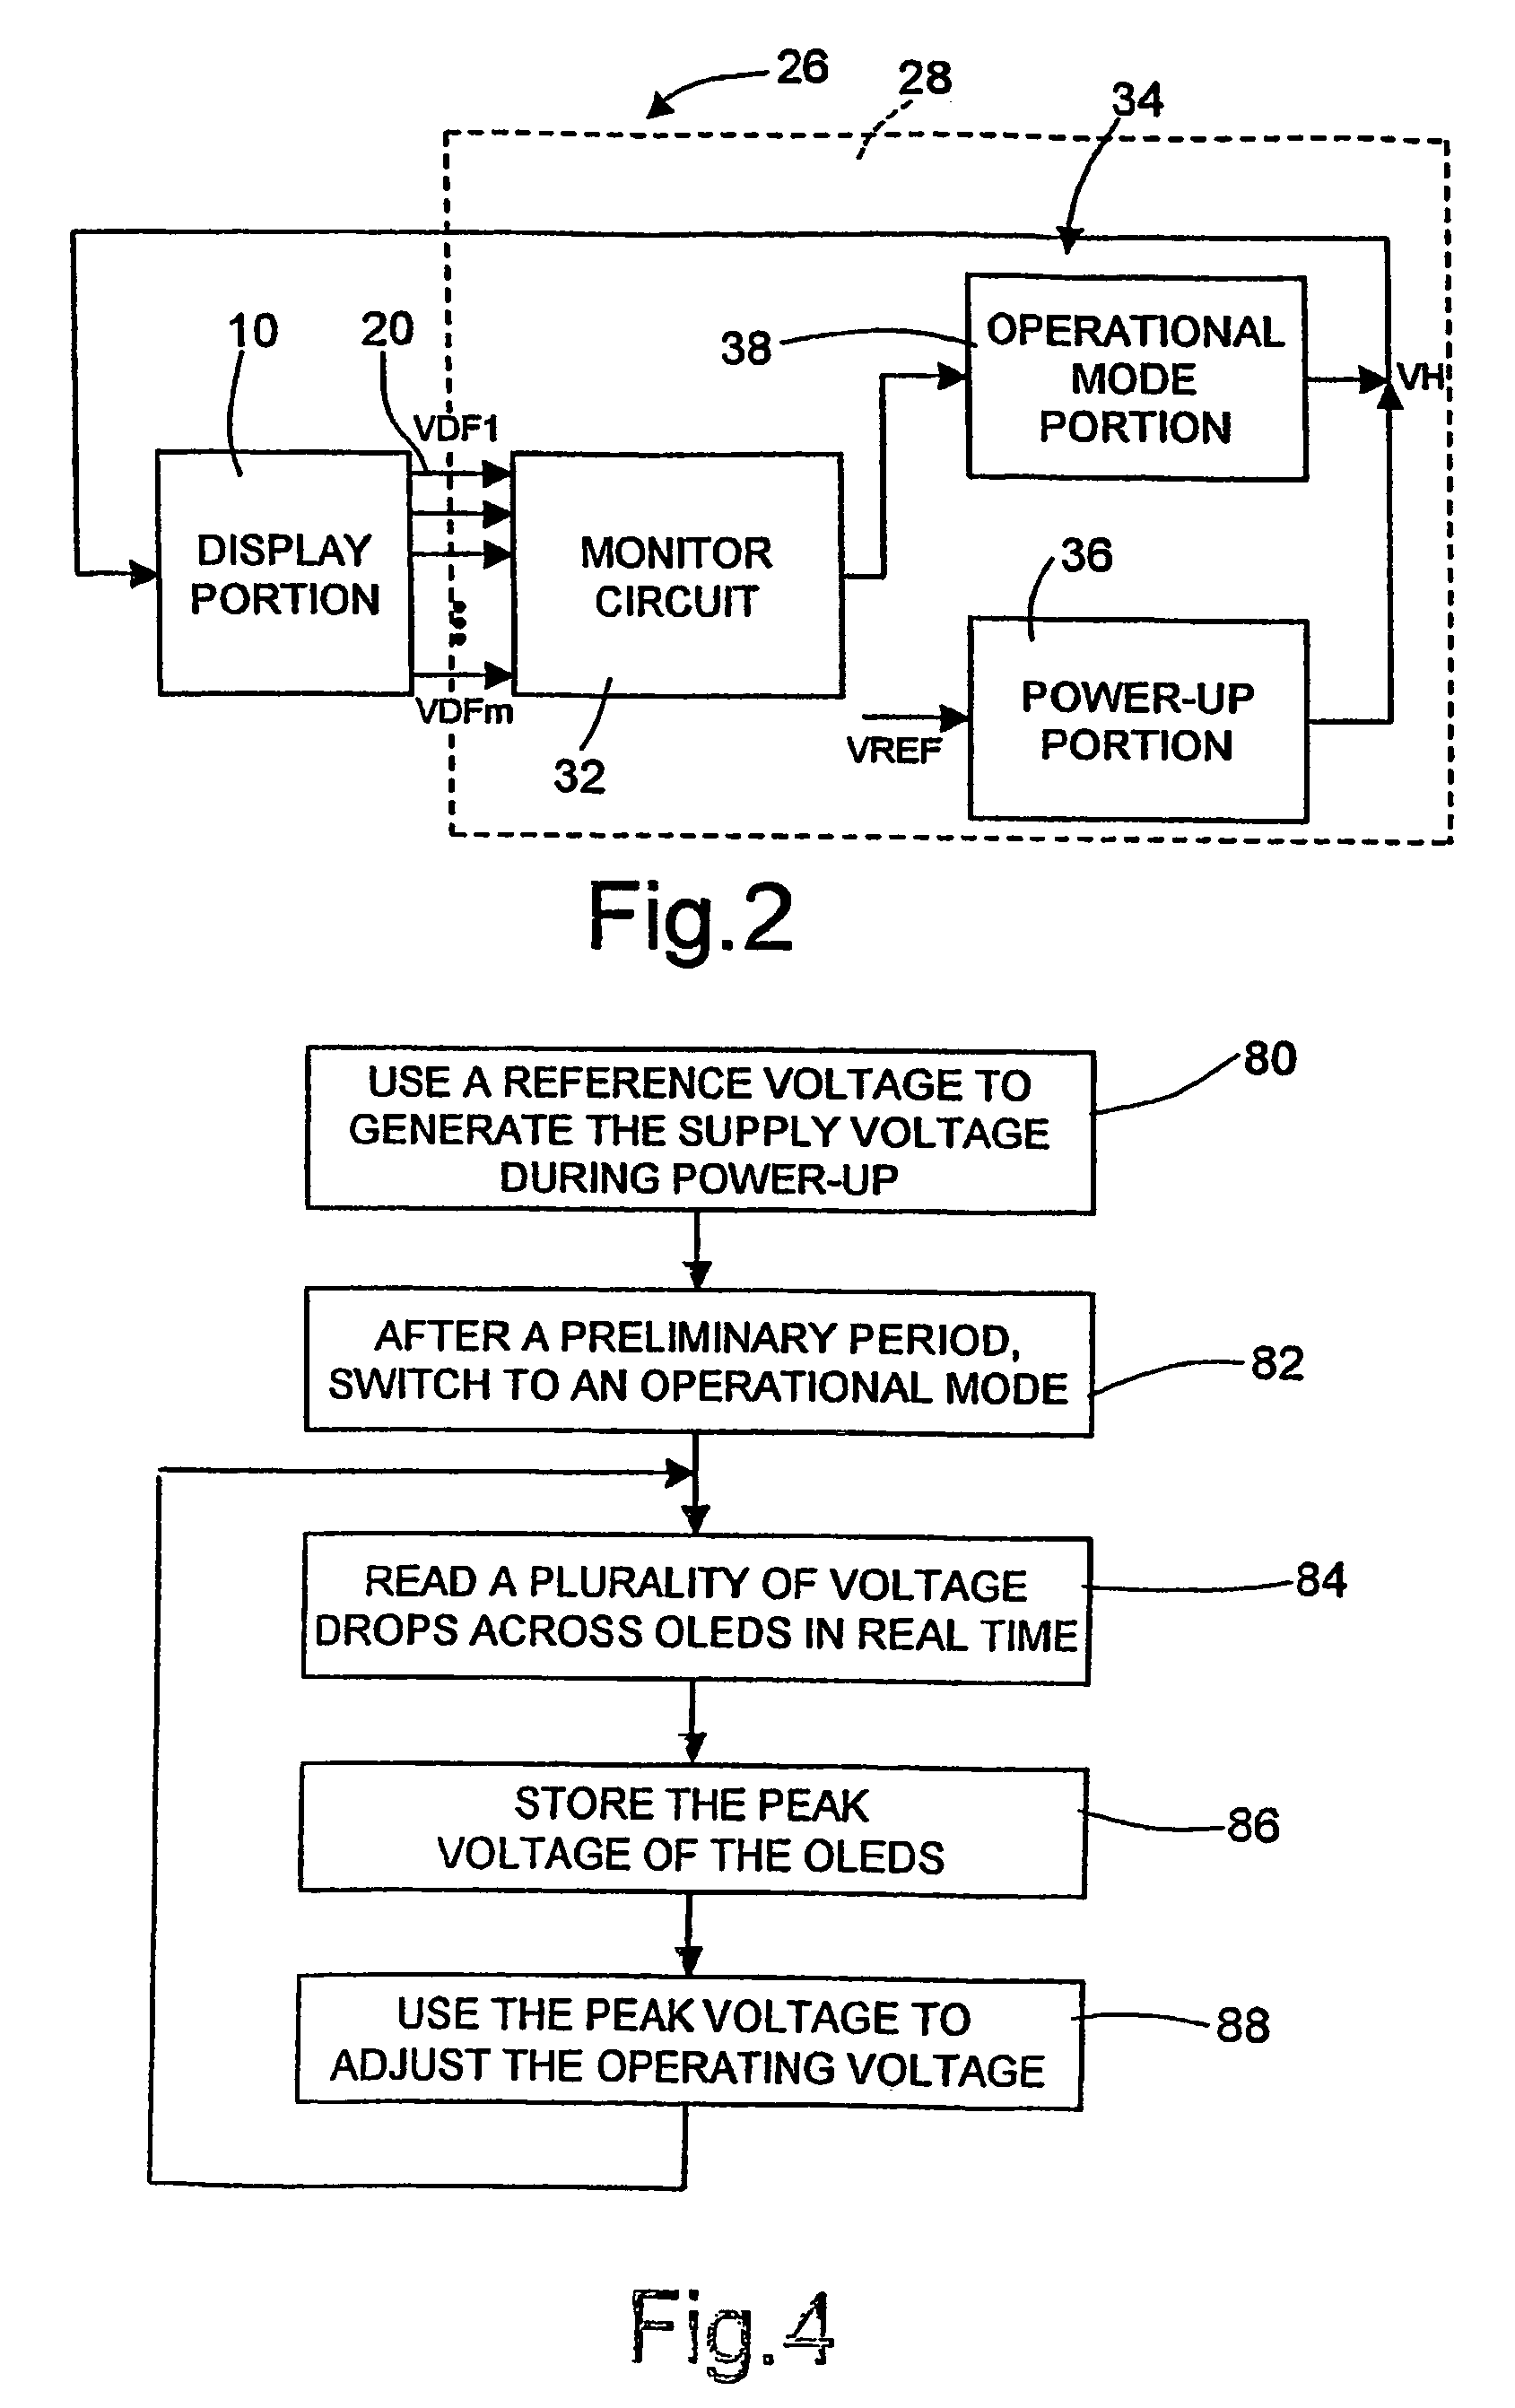 Driver for an OLED passive-matrix display